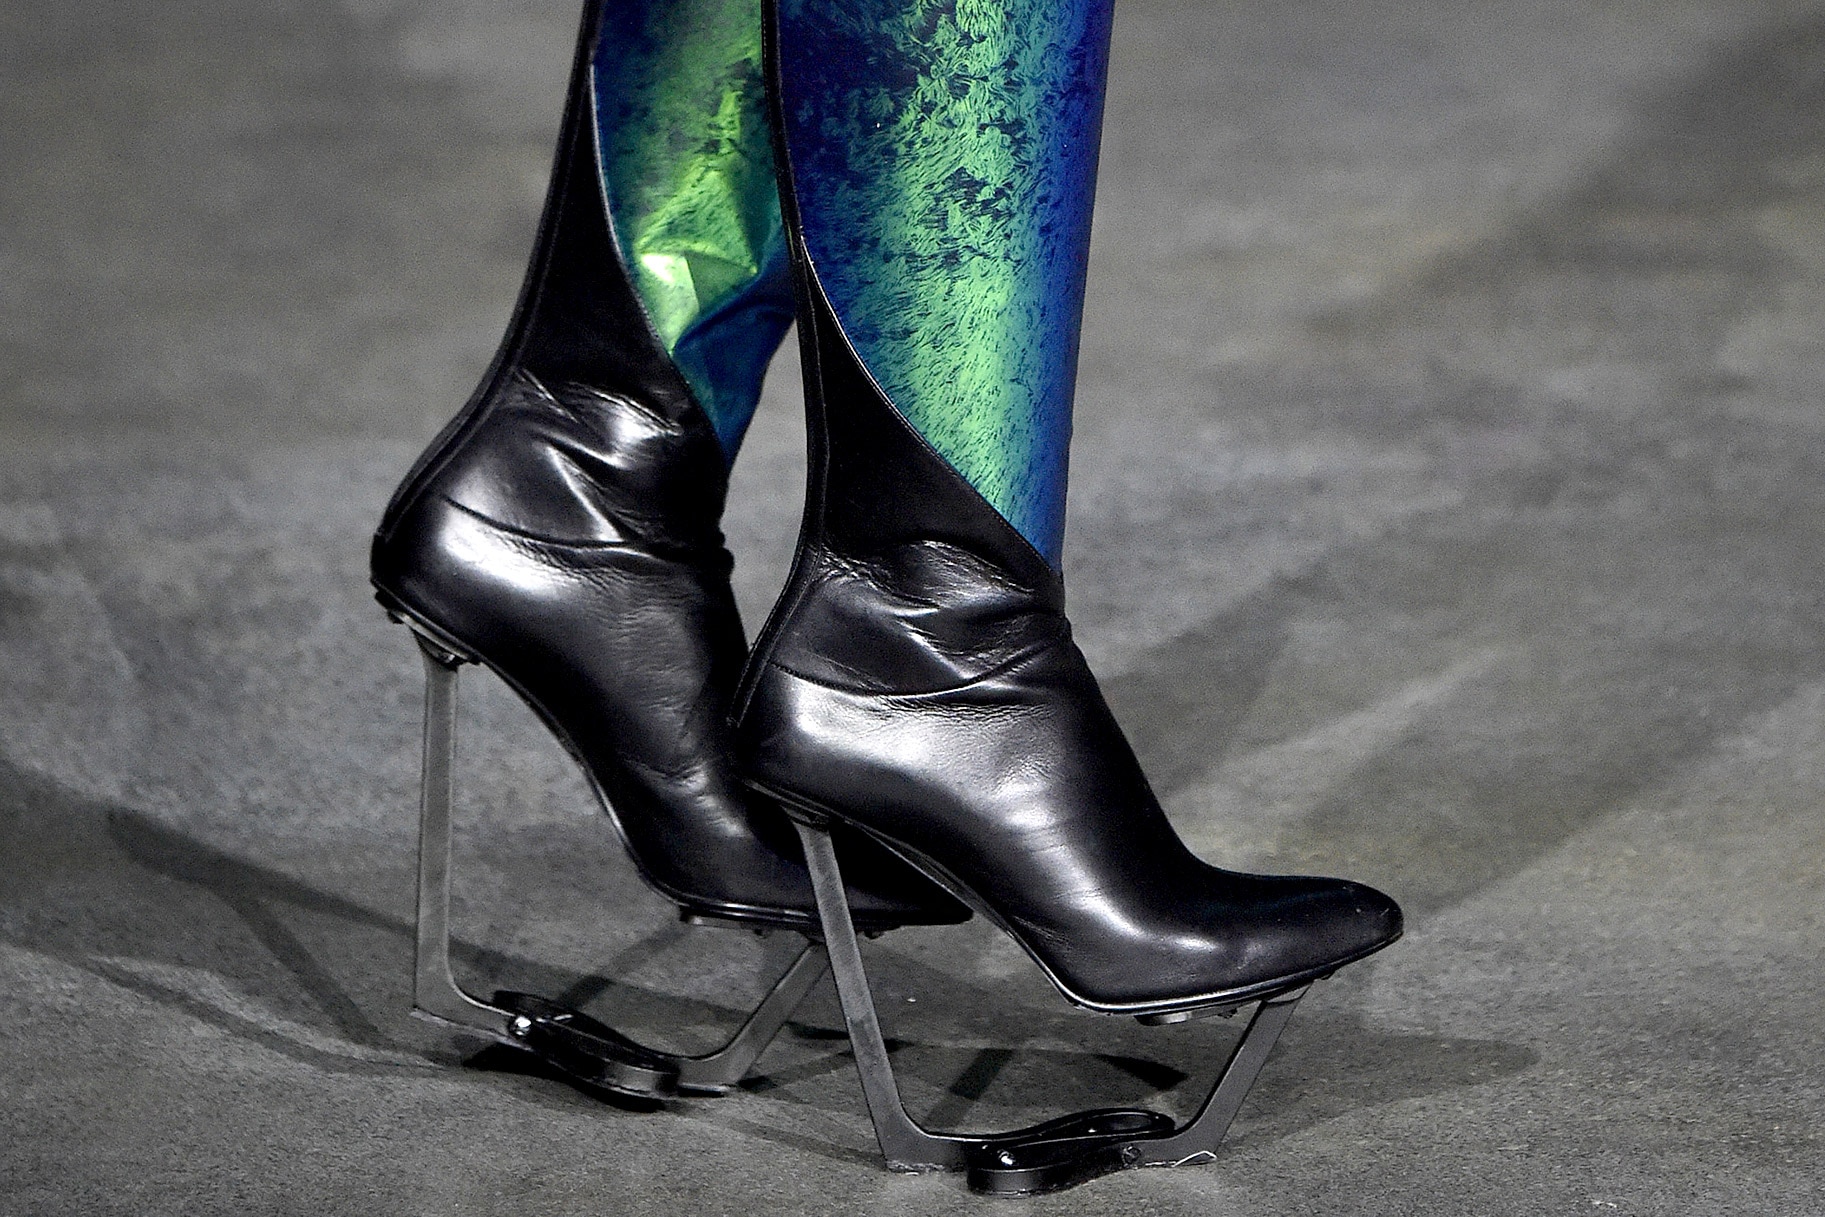 Paris Haute Couture Week: Versace Shoes See Photos | The Daily Dish